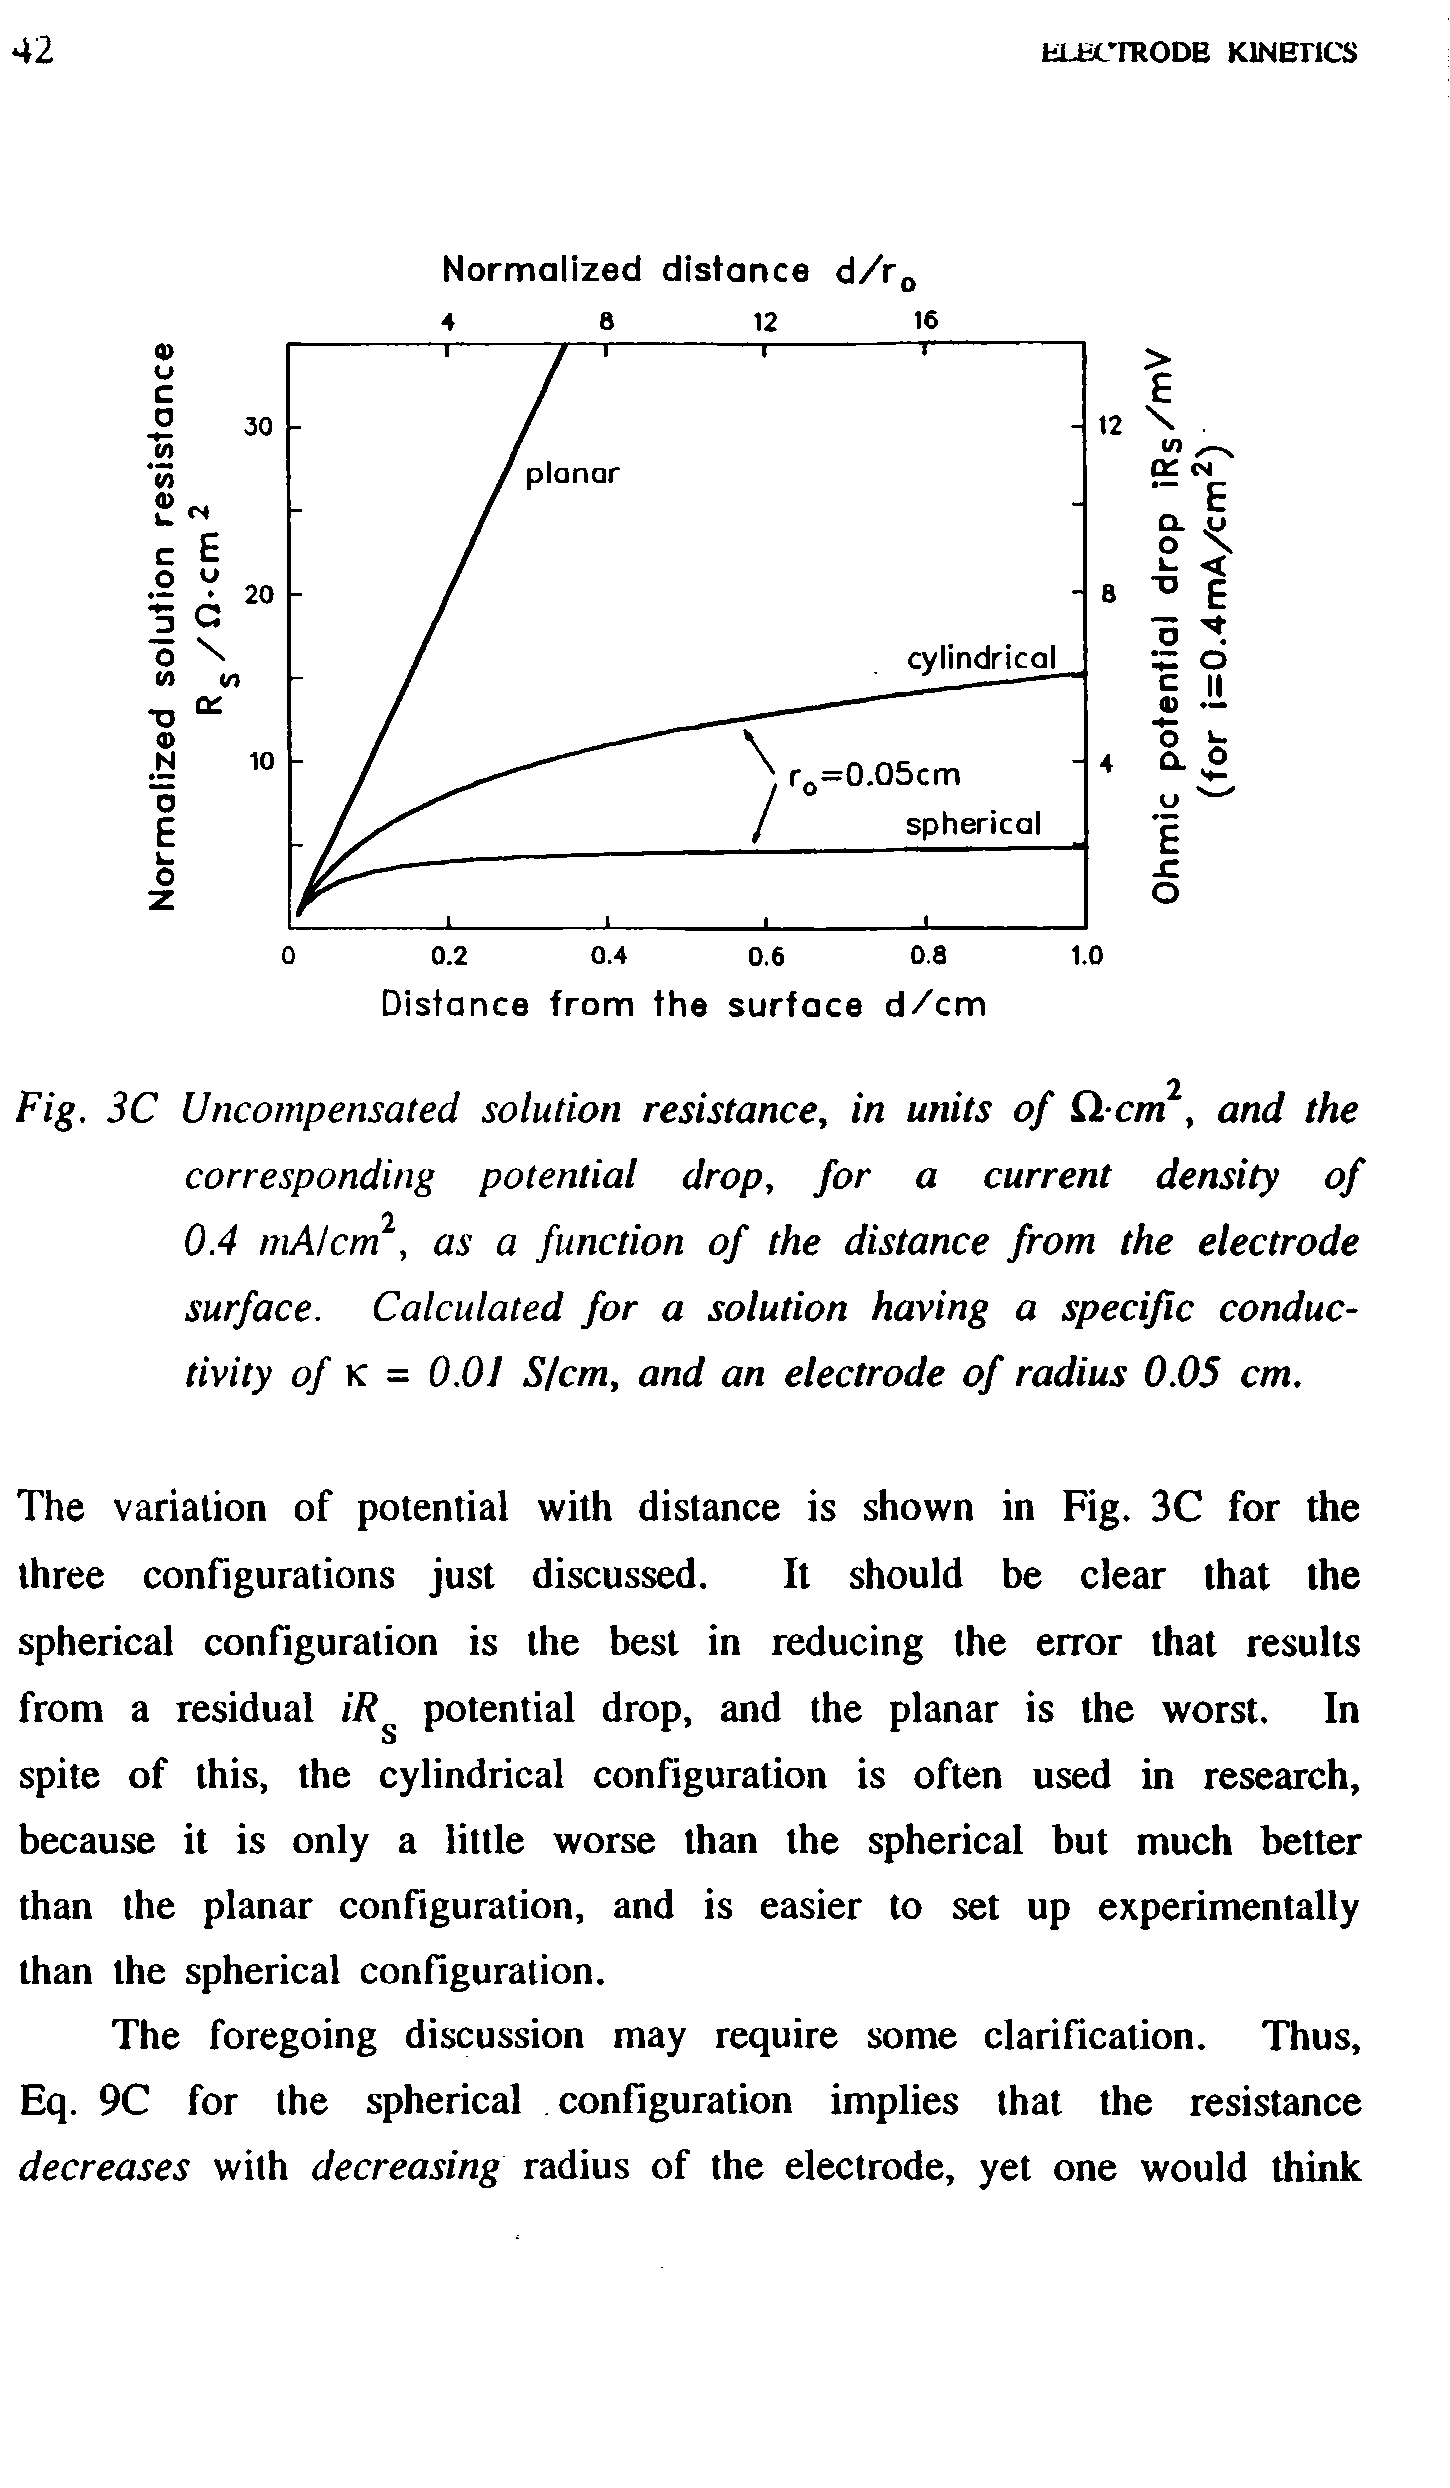 Fig. 3C Uncompensated solution resistance, in units of Q. cni, and the corresponding potential drop, for a current density of 0.4 mAlcm, as a function of the distance from the electrode surface. Calculated for a solution having a specific conductivity of K = 0.01 S/cm, and an electrode of radius 0.05 cm.